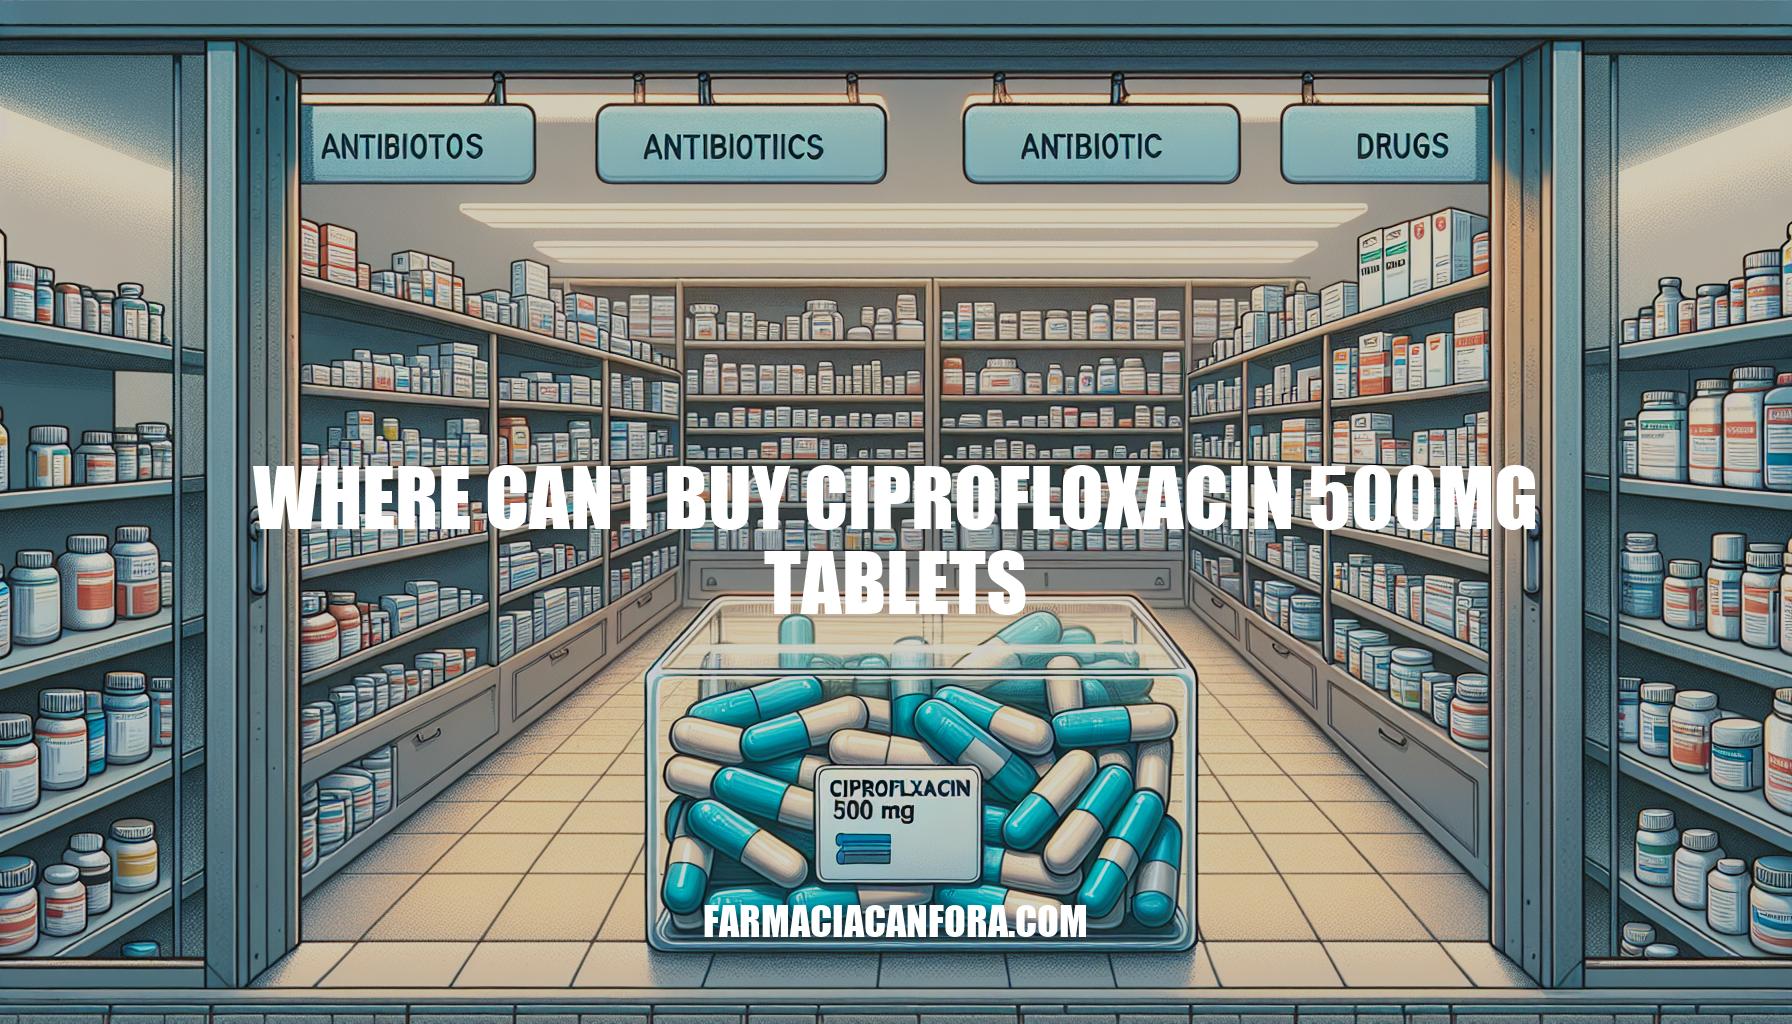 Where Can I Buy Ciprofloxacin 500mg Tablets: Best Places to Purchase